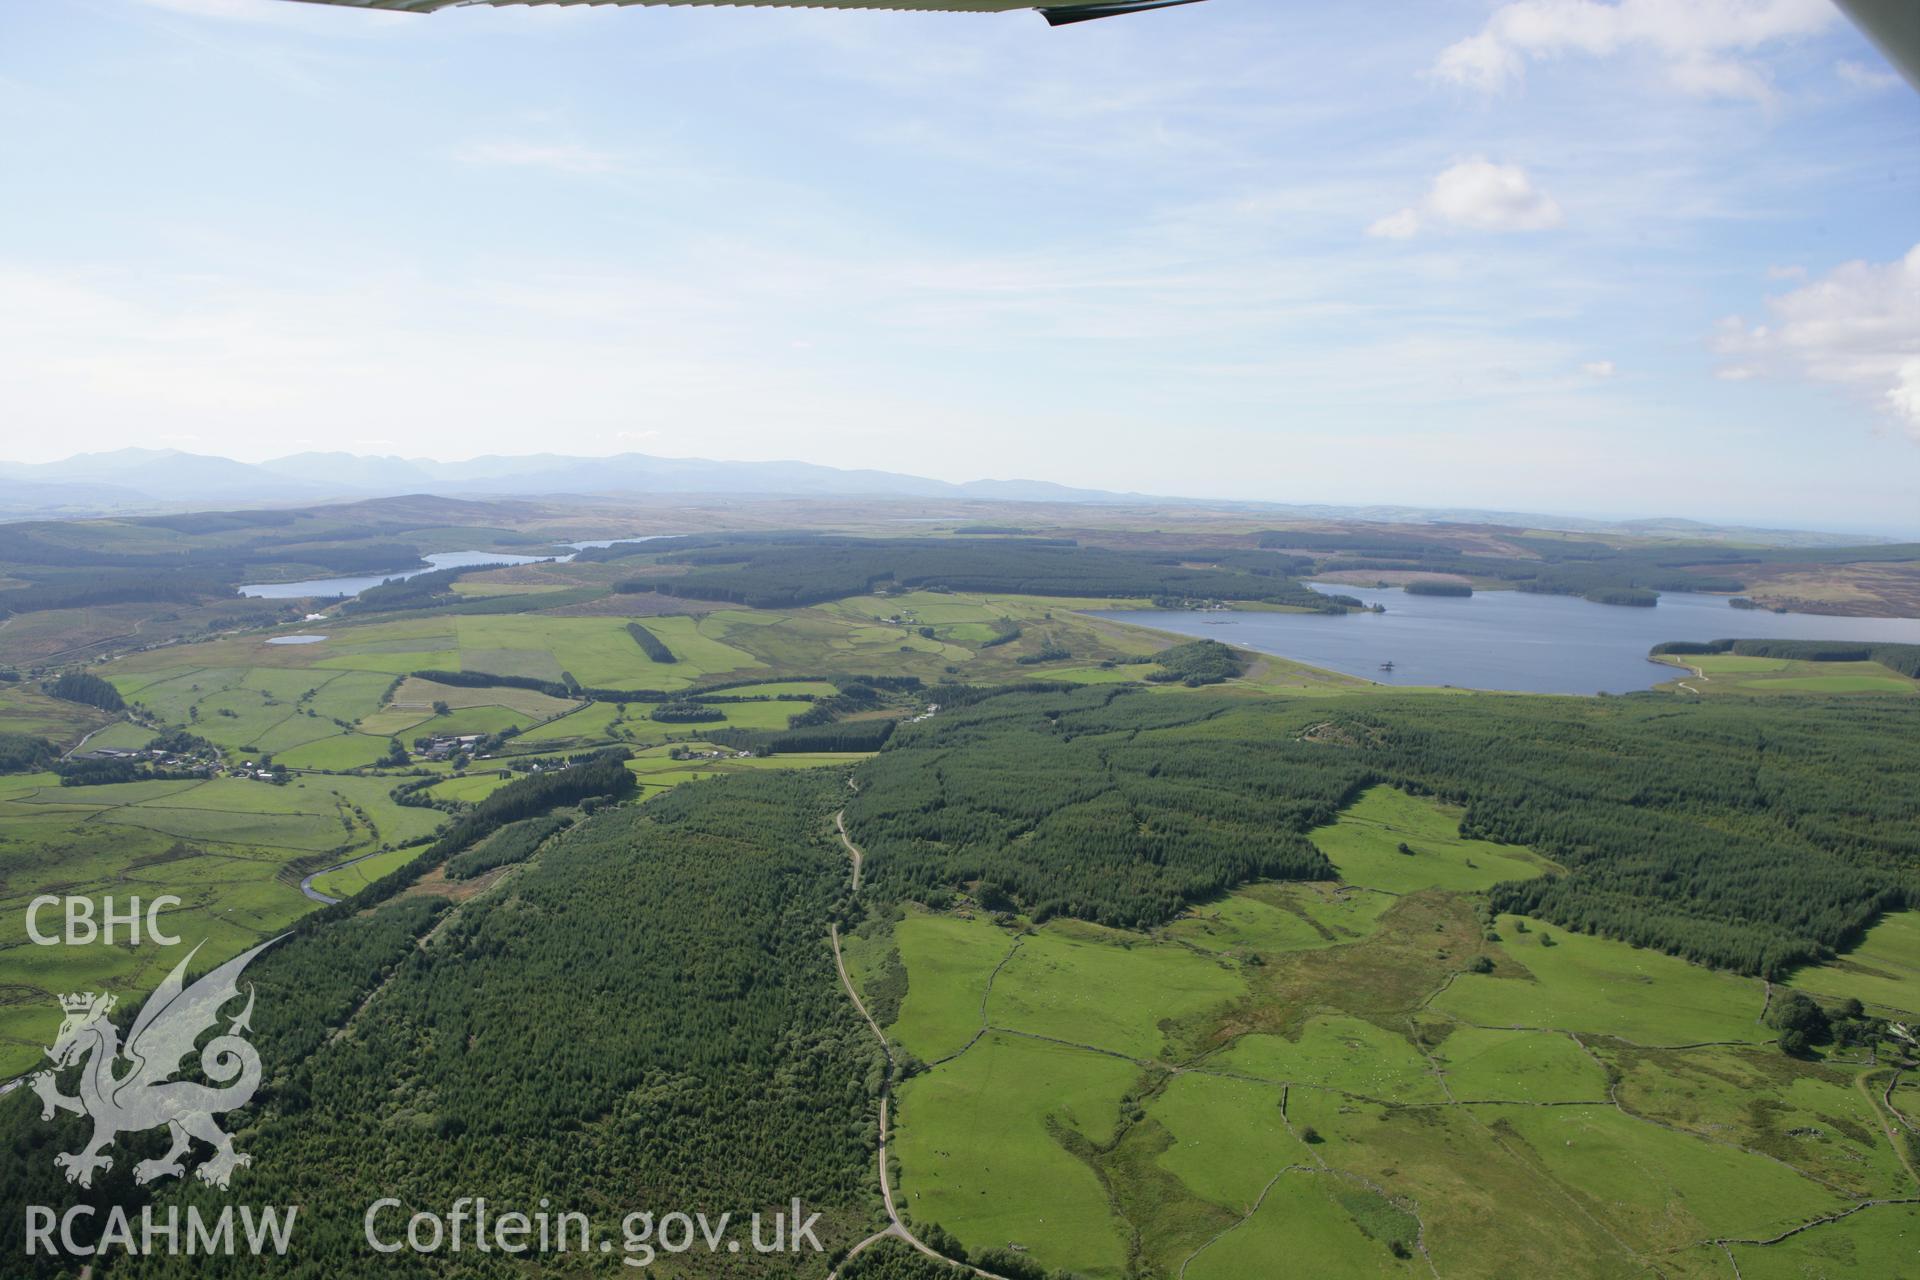 RCAHMW colour oblique aerial photograph showing distant landscape of Llyn Brenig from the south-east. Taken on 31 July 2007 by Toby Driver